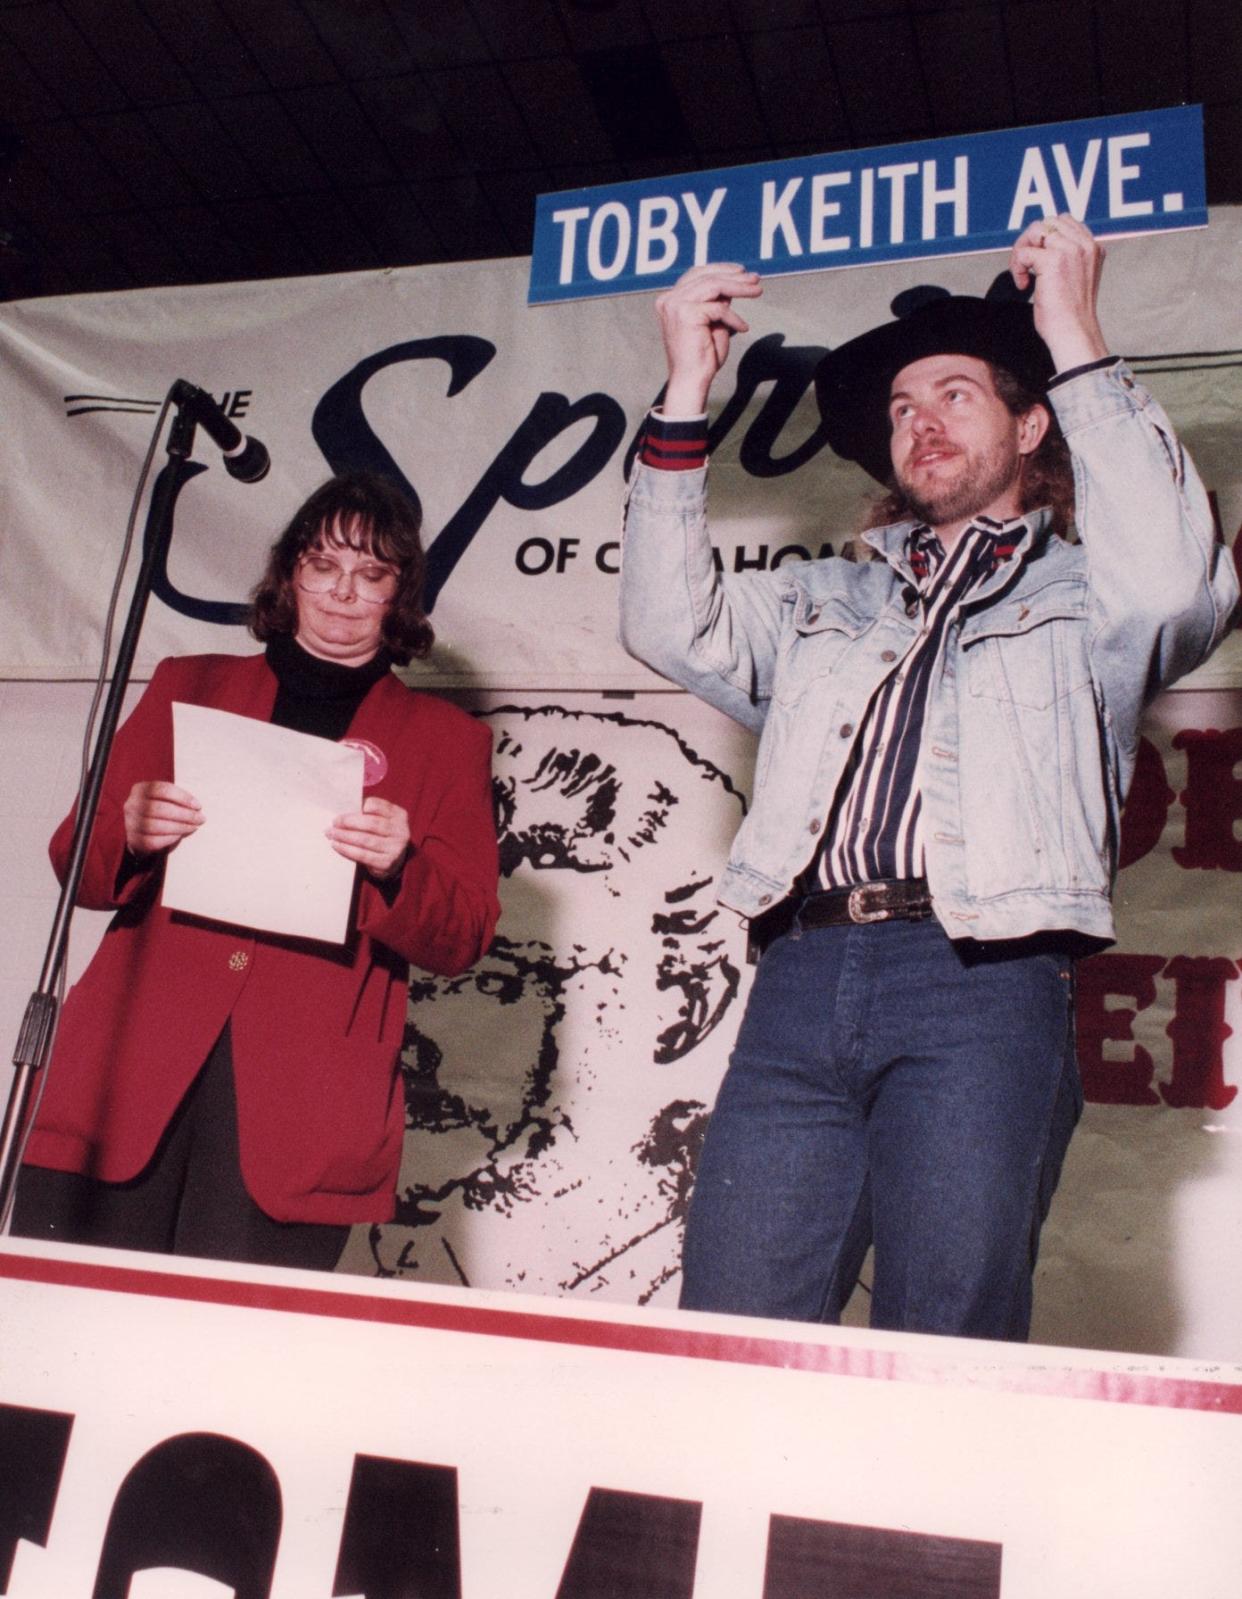 In March 1994, country music singer Toby Keith holds a street sign named in his honor. Moore Mayor Debe Homer had presented Keith the sign during a ceremony at Moore High School.